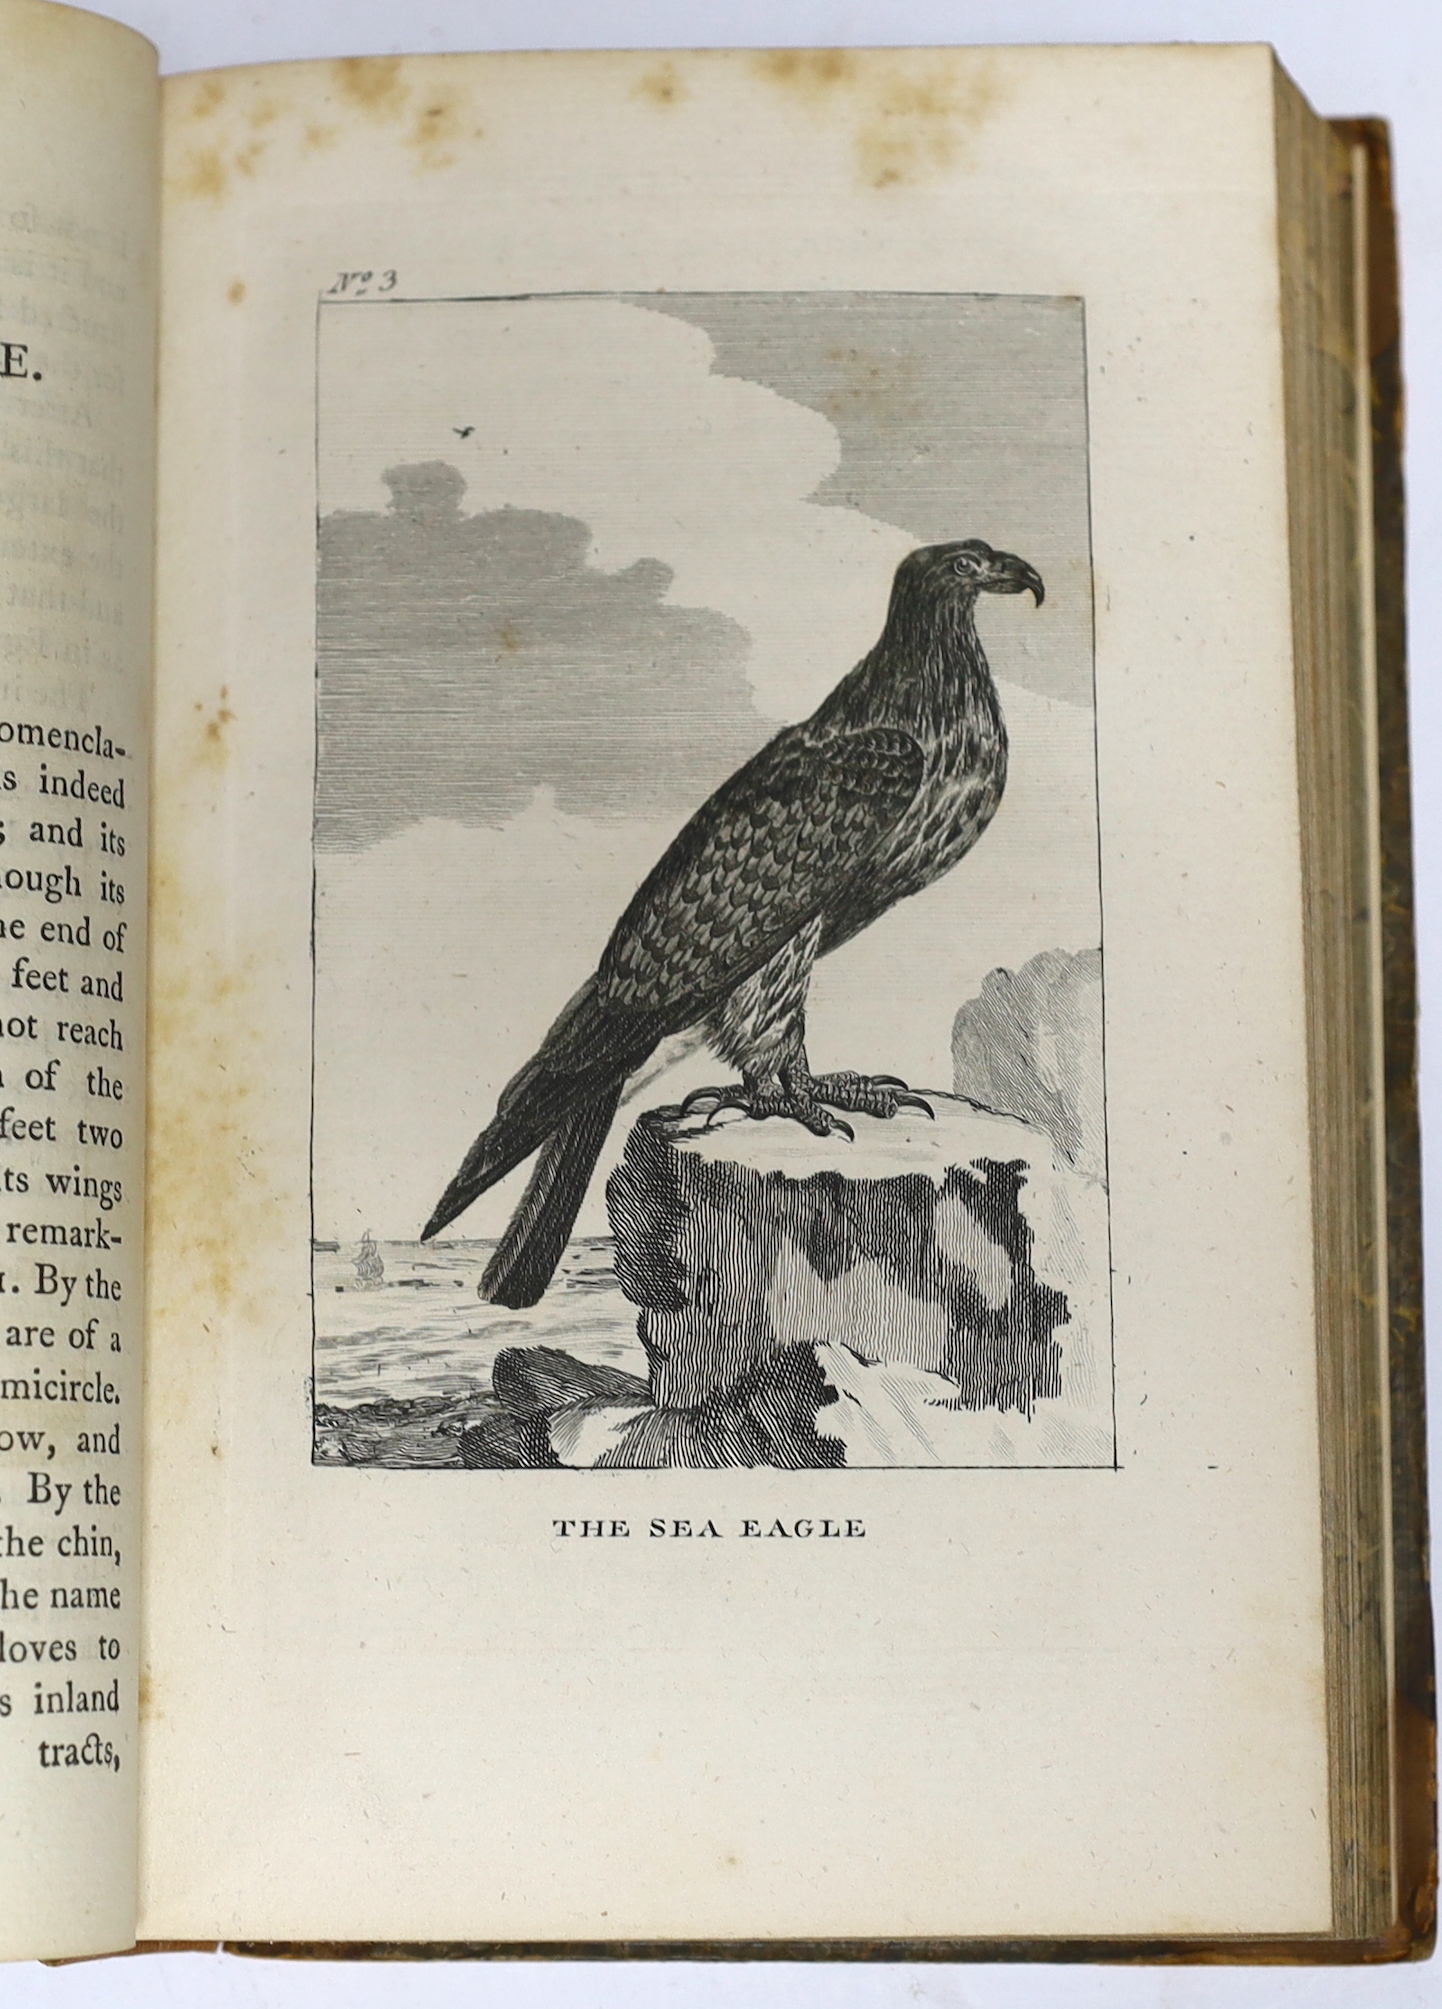 Buffon, George-Louis Leclerc, Comte de - The Natural History of Birds from the French of the Count de Buffon: illustrated with engravings; and a preface, notes, and additions by the translator [William Smellie], 6 vols.